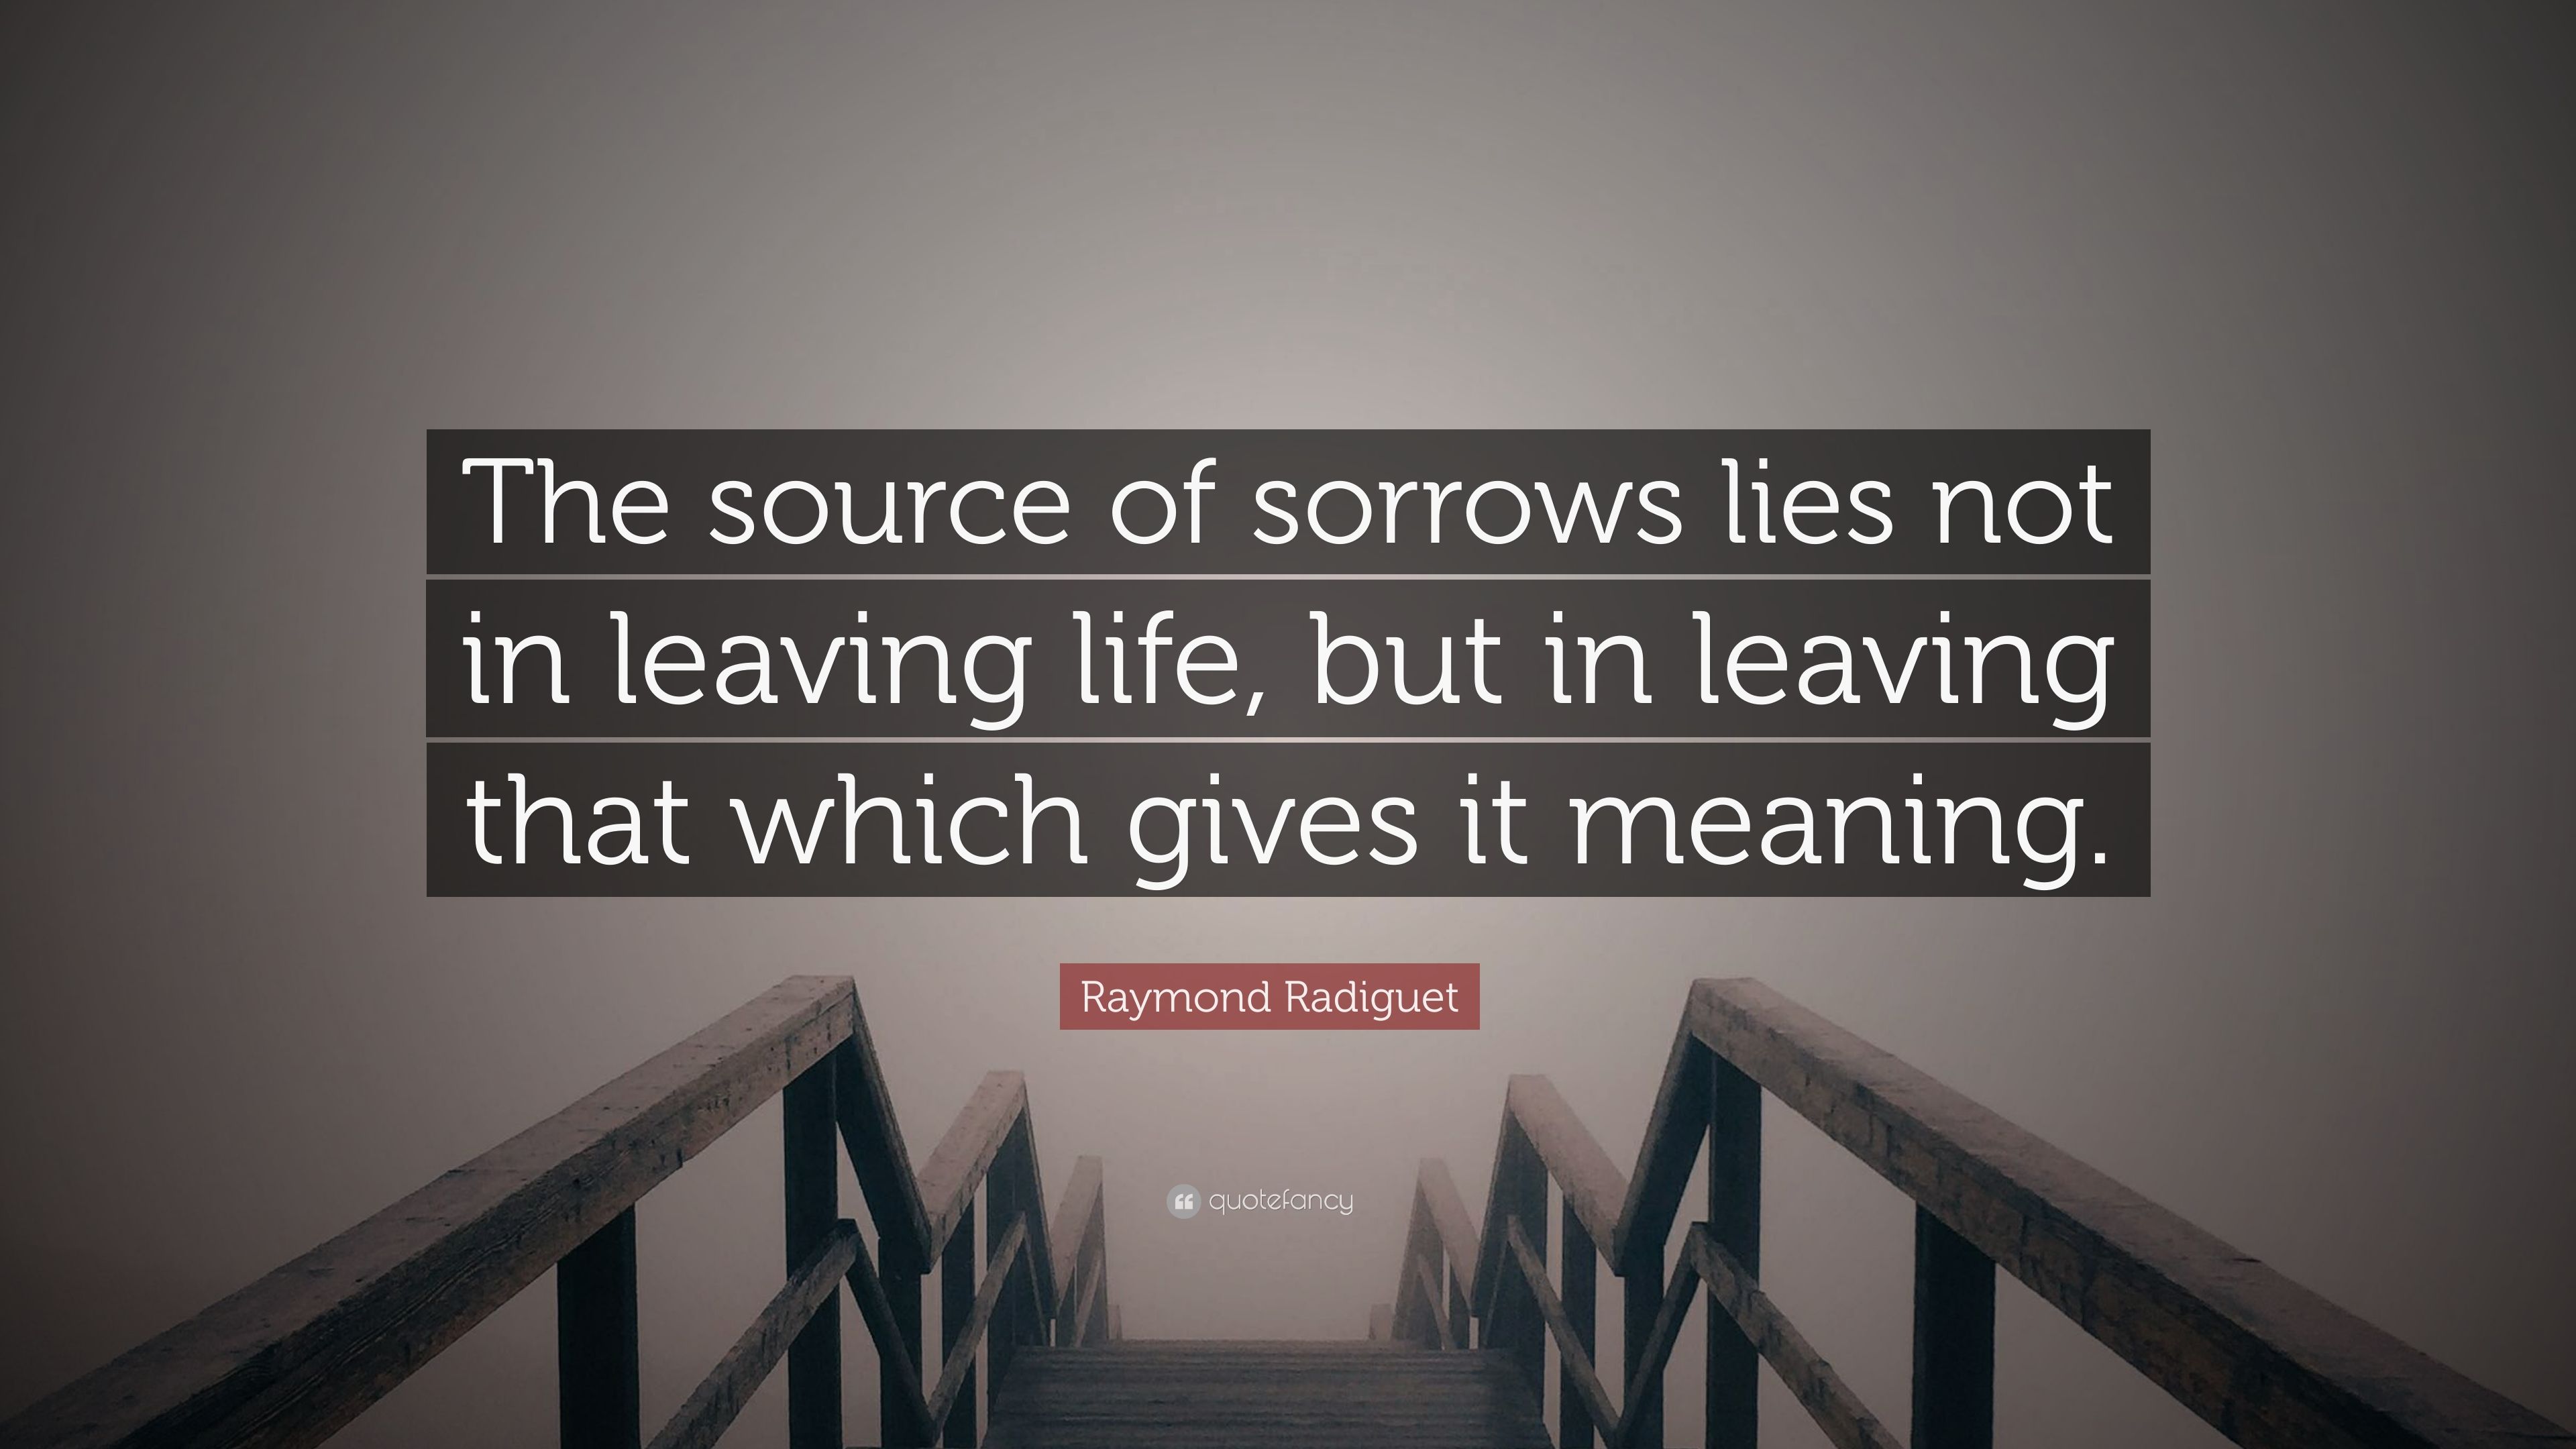 Raymond Radiguet Quote: “The source of sorrows lies not in leaving life, but in leaving that which gives it meaning.” (7 wallpaper)